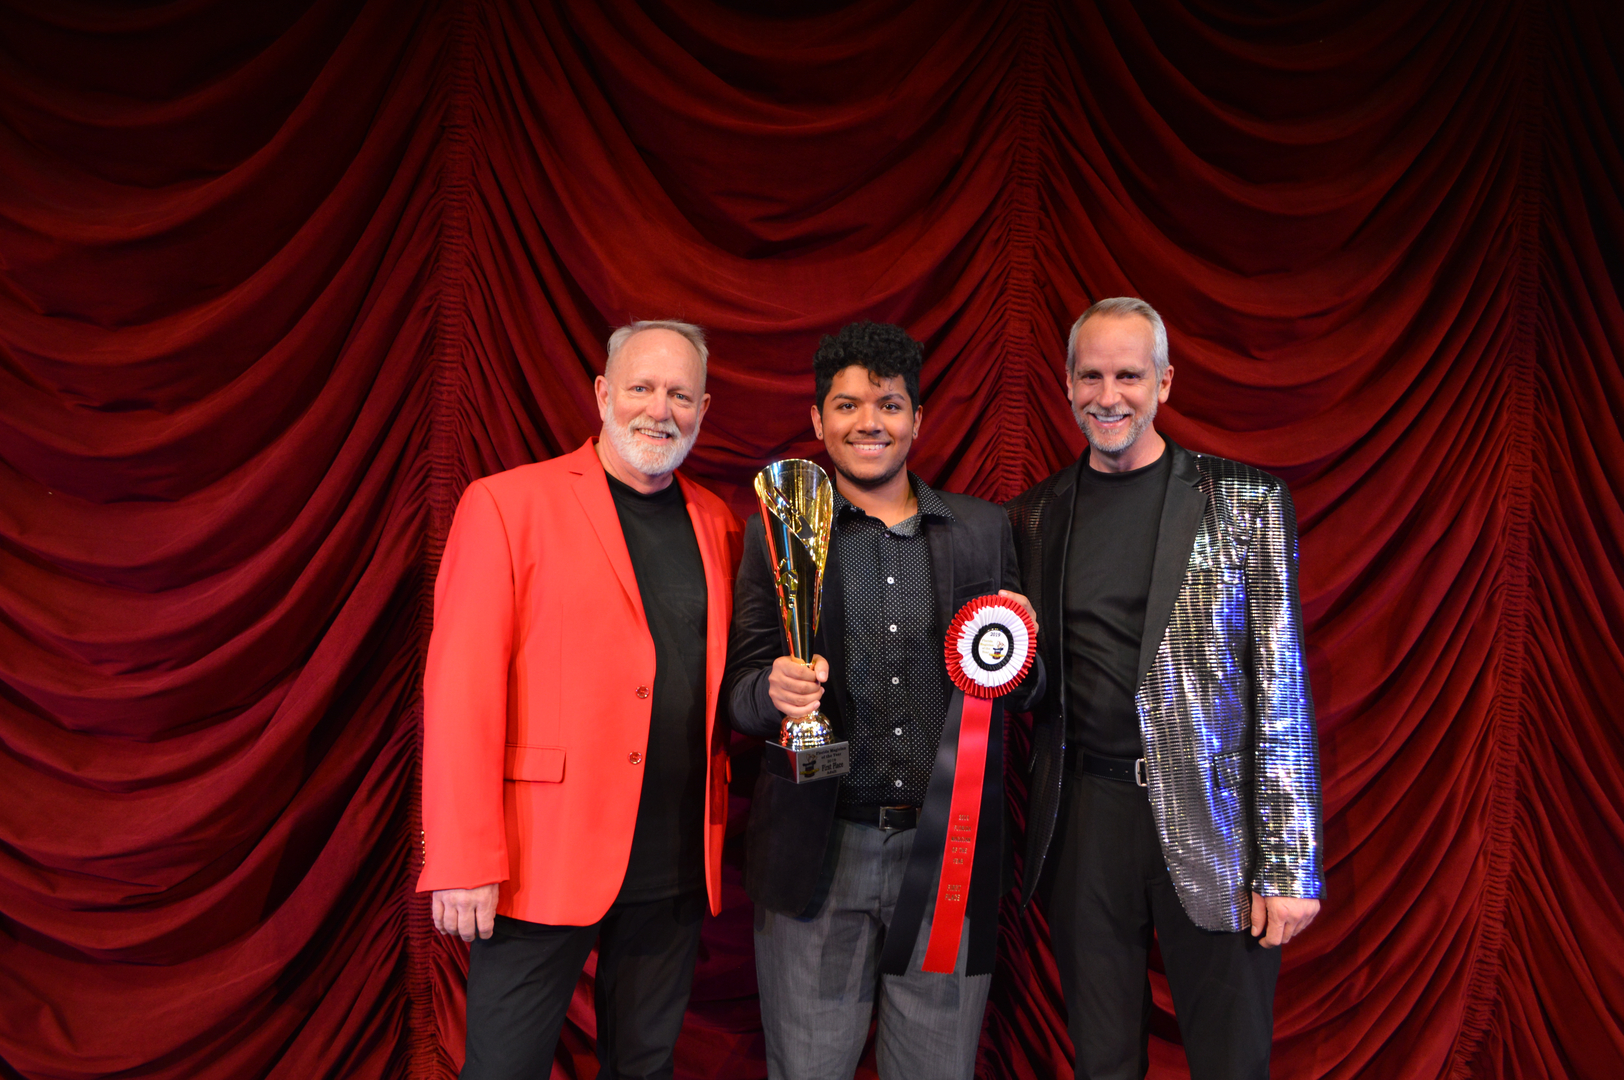 Three men standing in front of a red curtain.